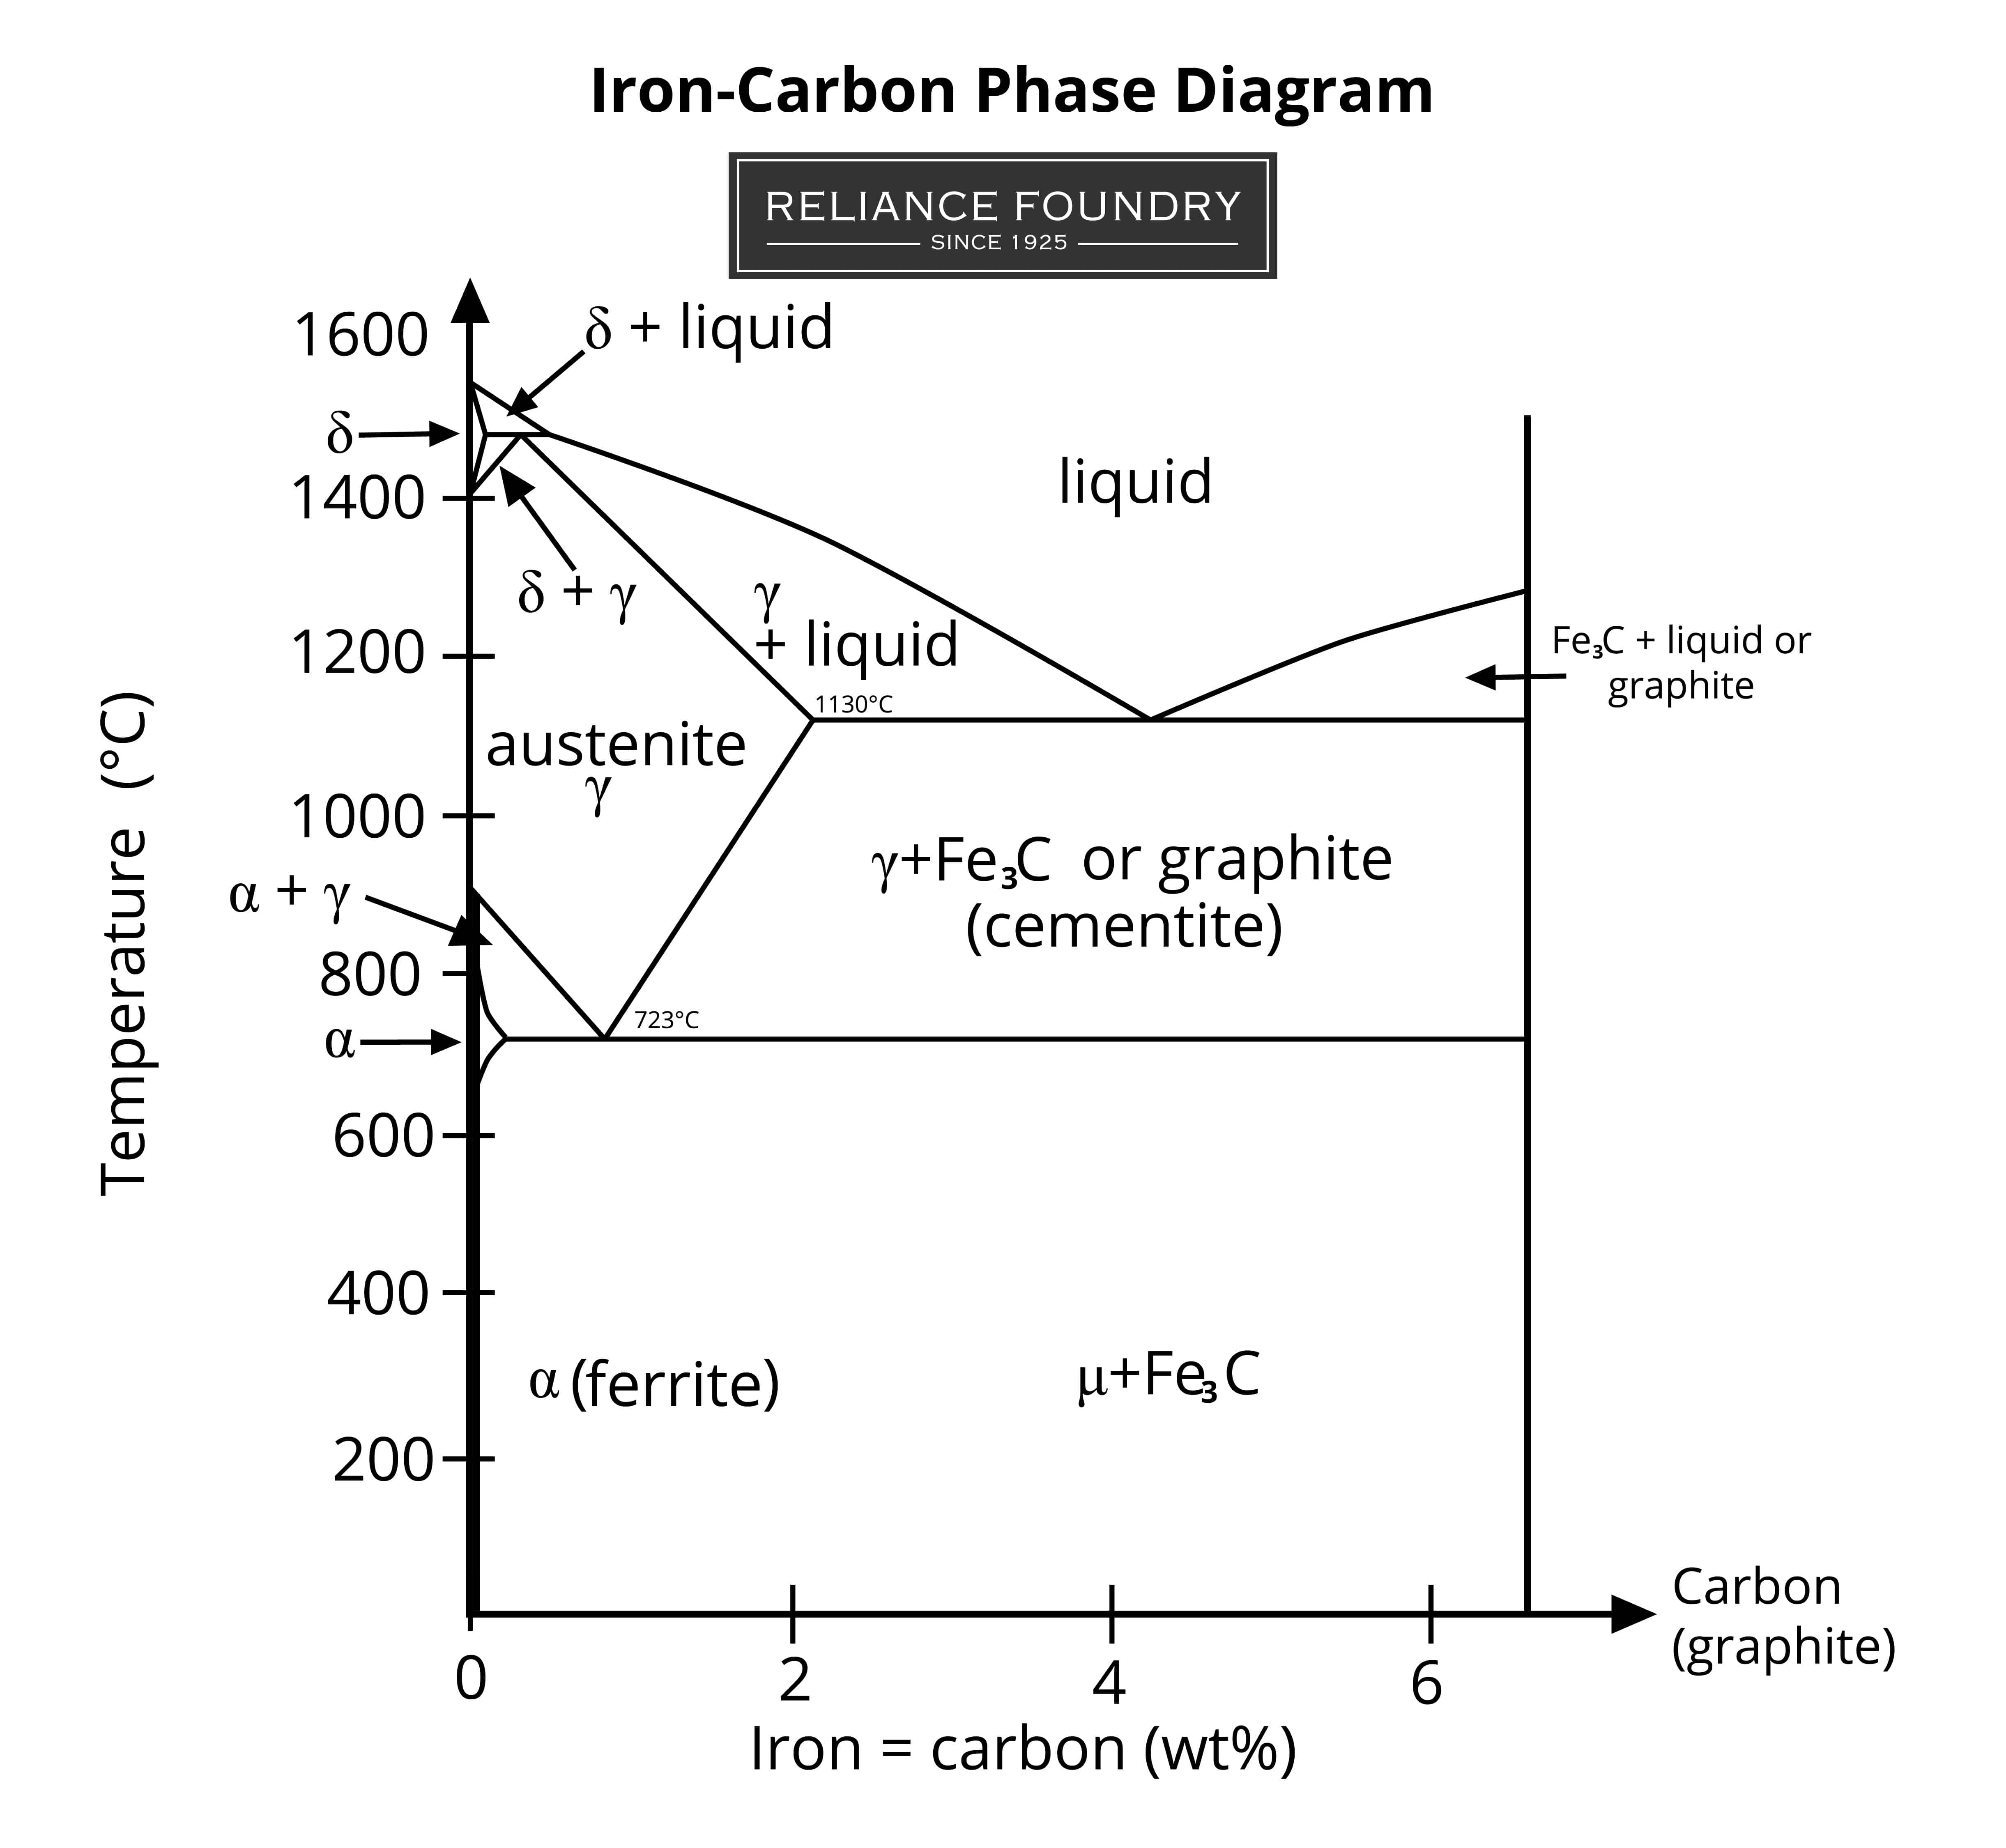 Technical chart with carbon between 2—6% on x-axis and temperature between 200—1600°C on y-axis showing the types of microstructure steel has at different temperatures including austenite, ferrite, and graphite